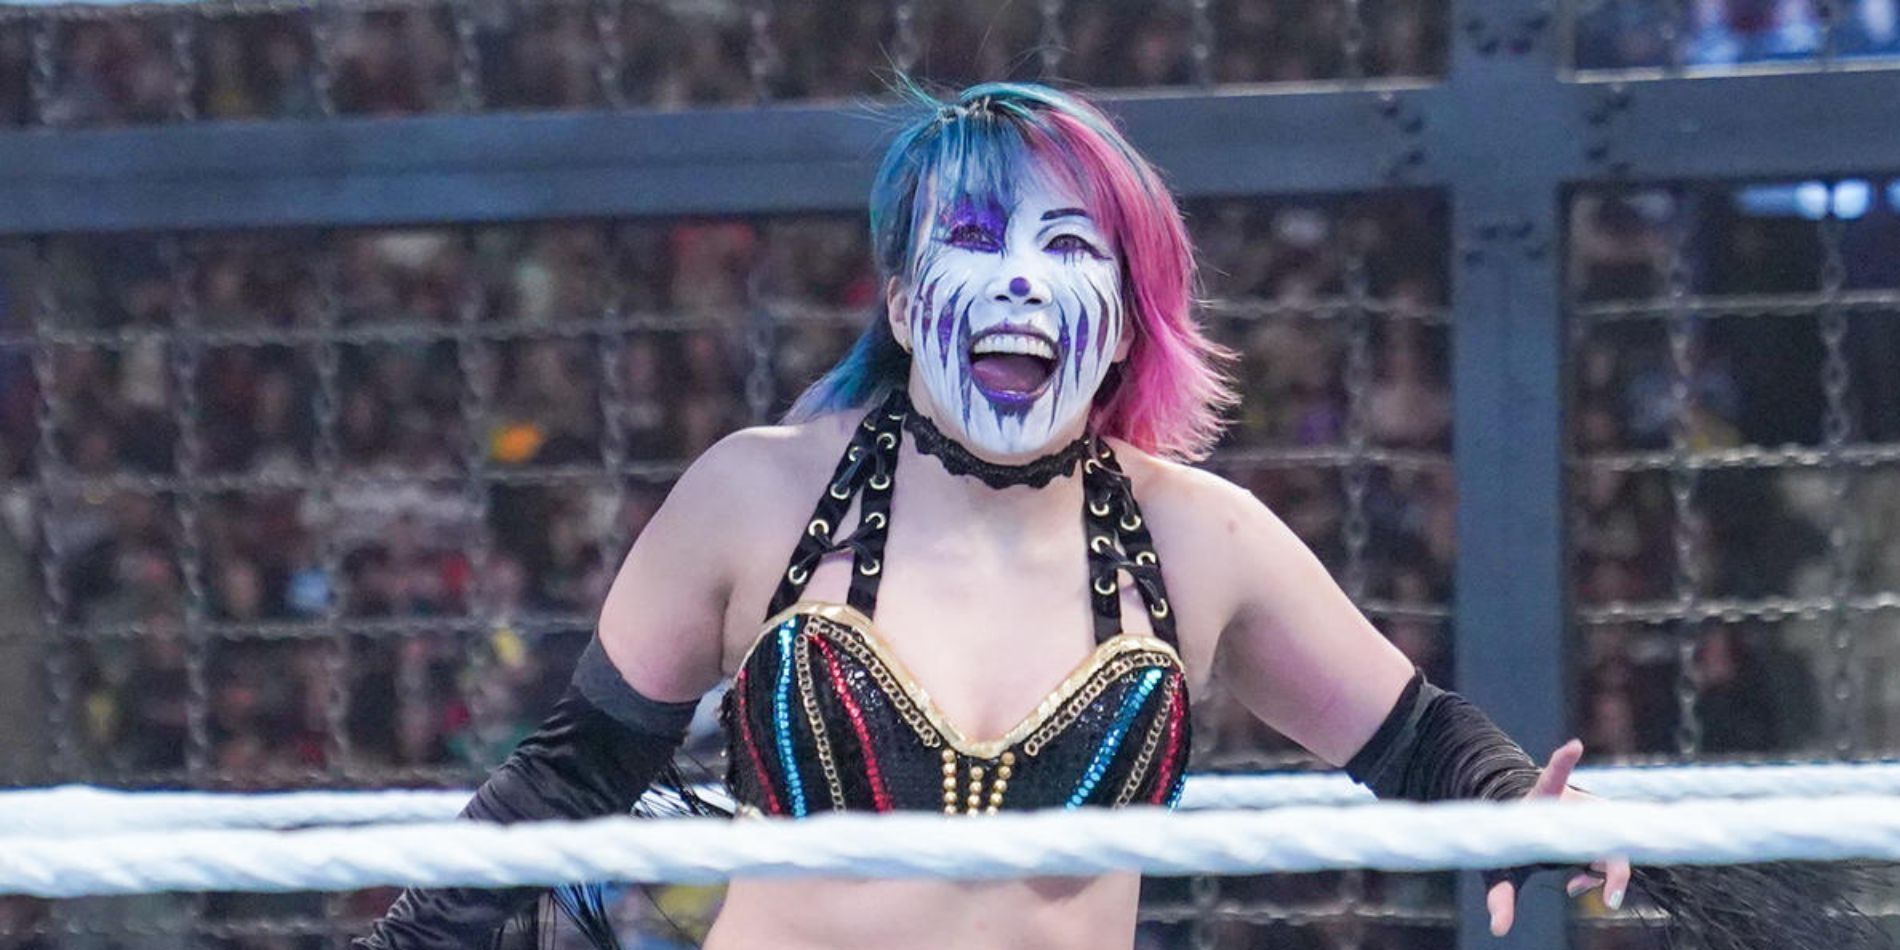 Asuka in the Elimination Chamber